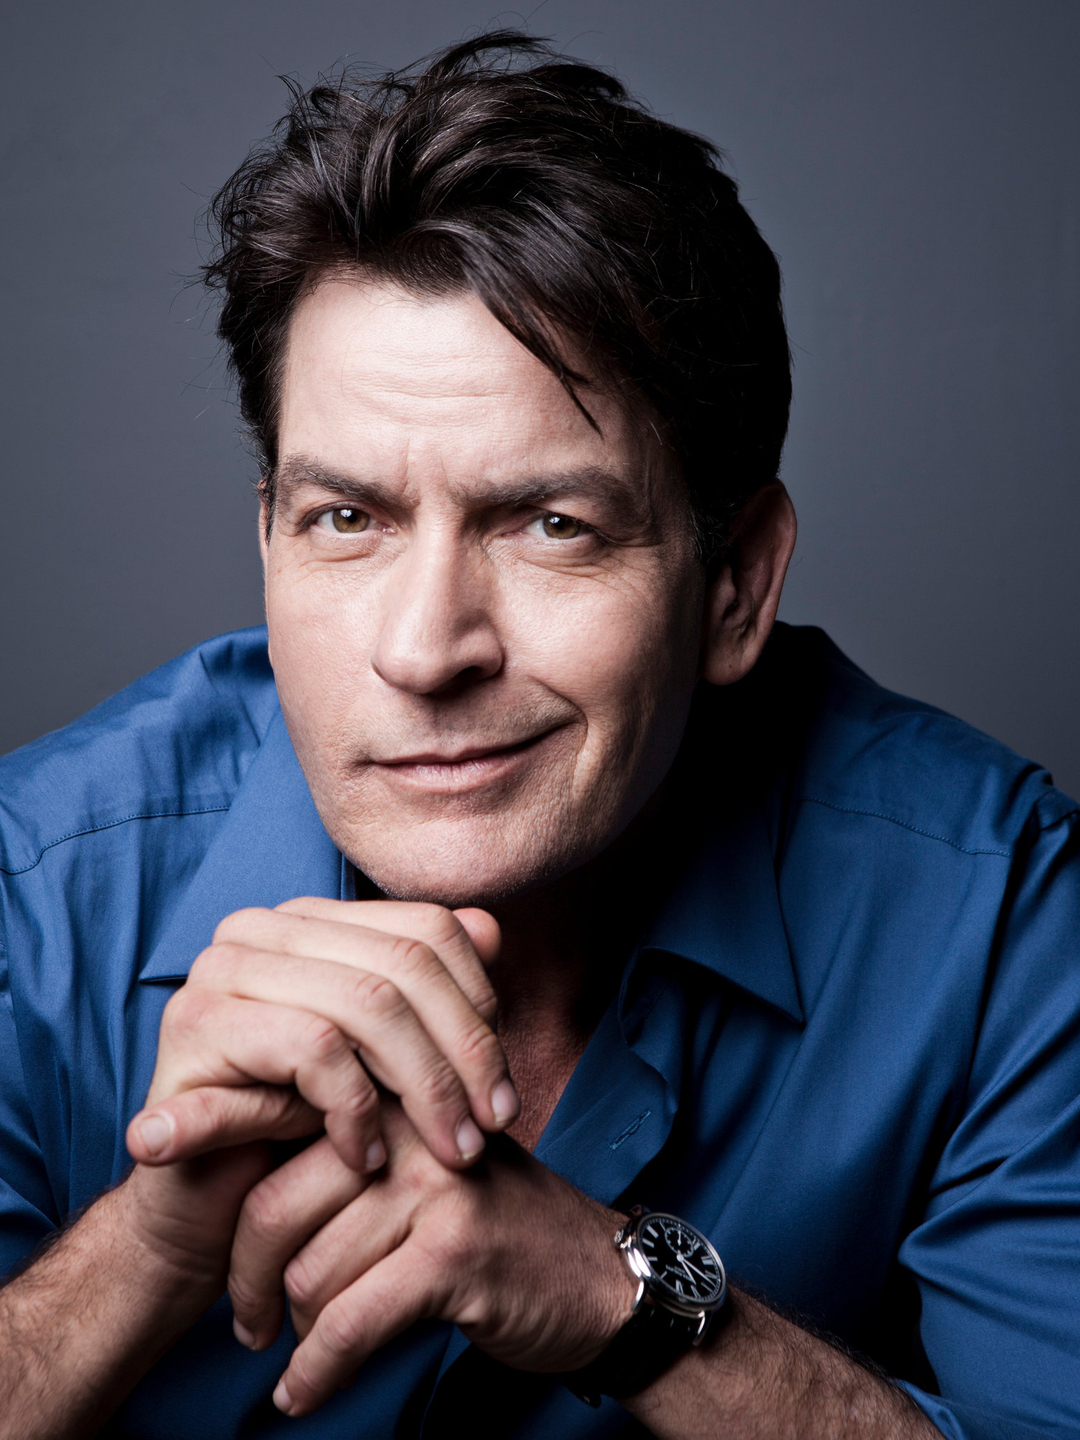 Charlie Sheen young photos